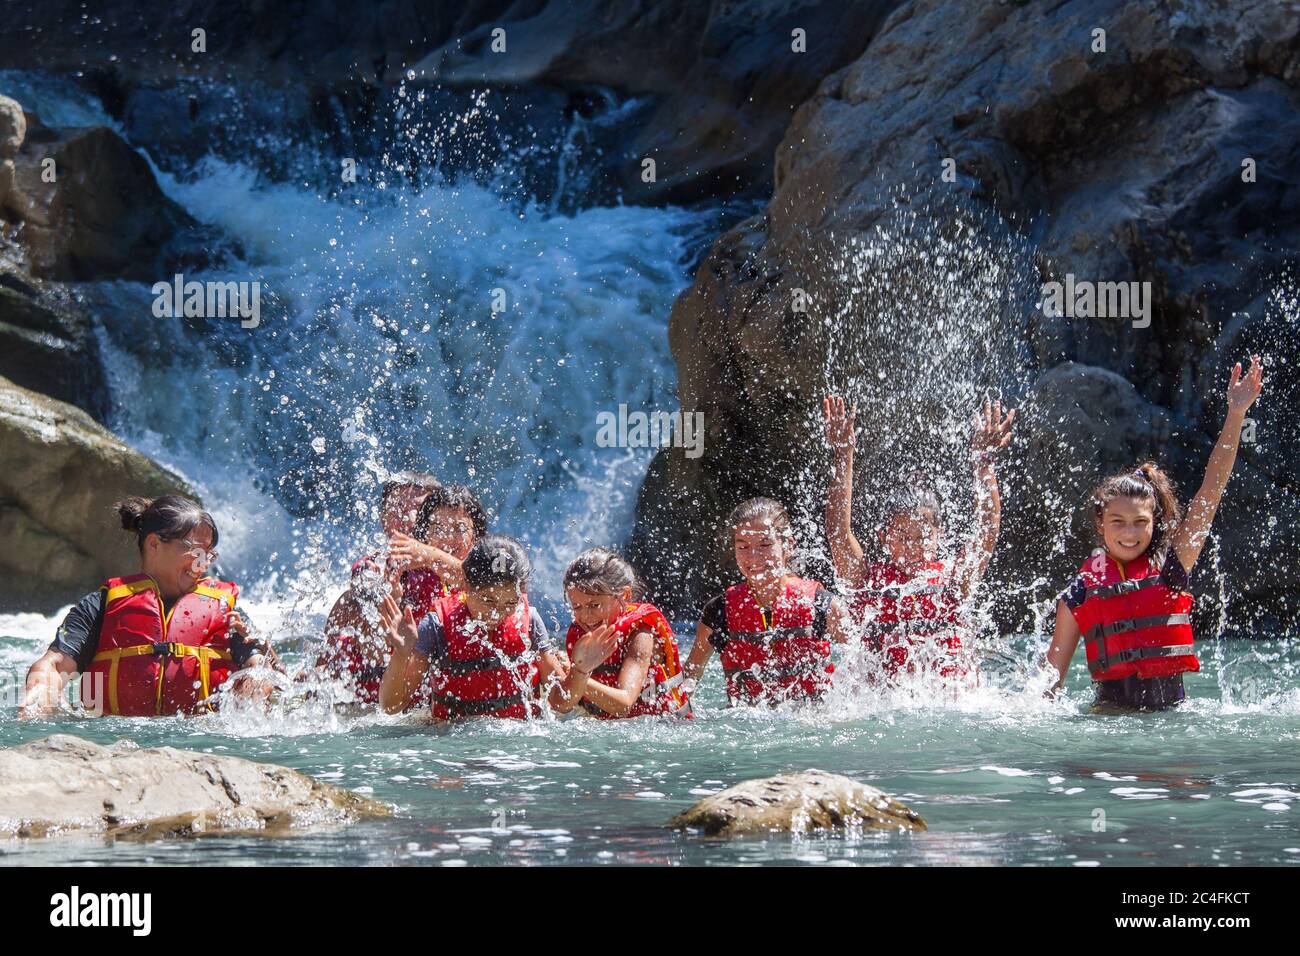 CIUCAS, CLUJ COUNTY, ROMANIA - JULY.11.2016: Children from a socially disadvantaged community taken on a holiday trip playing in the water at a small Stock Photo